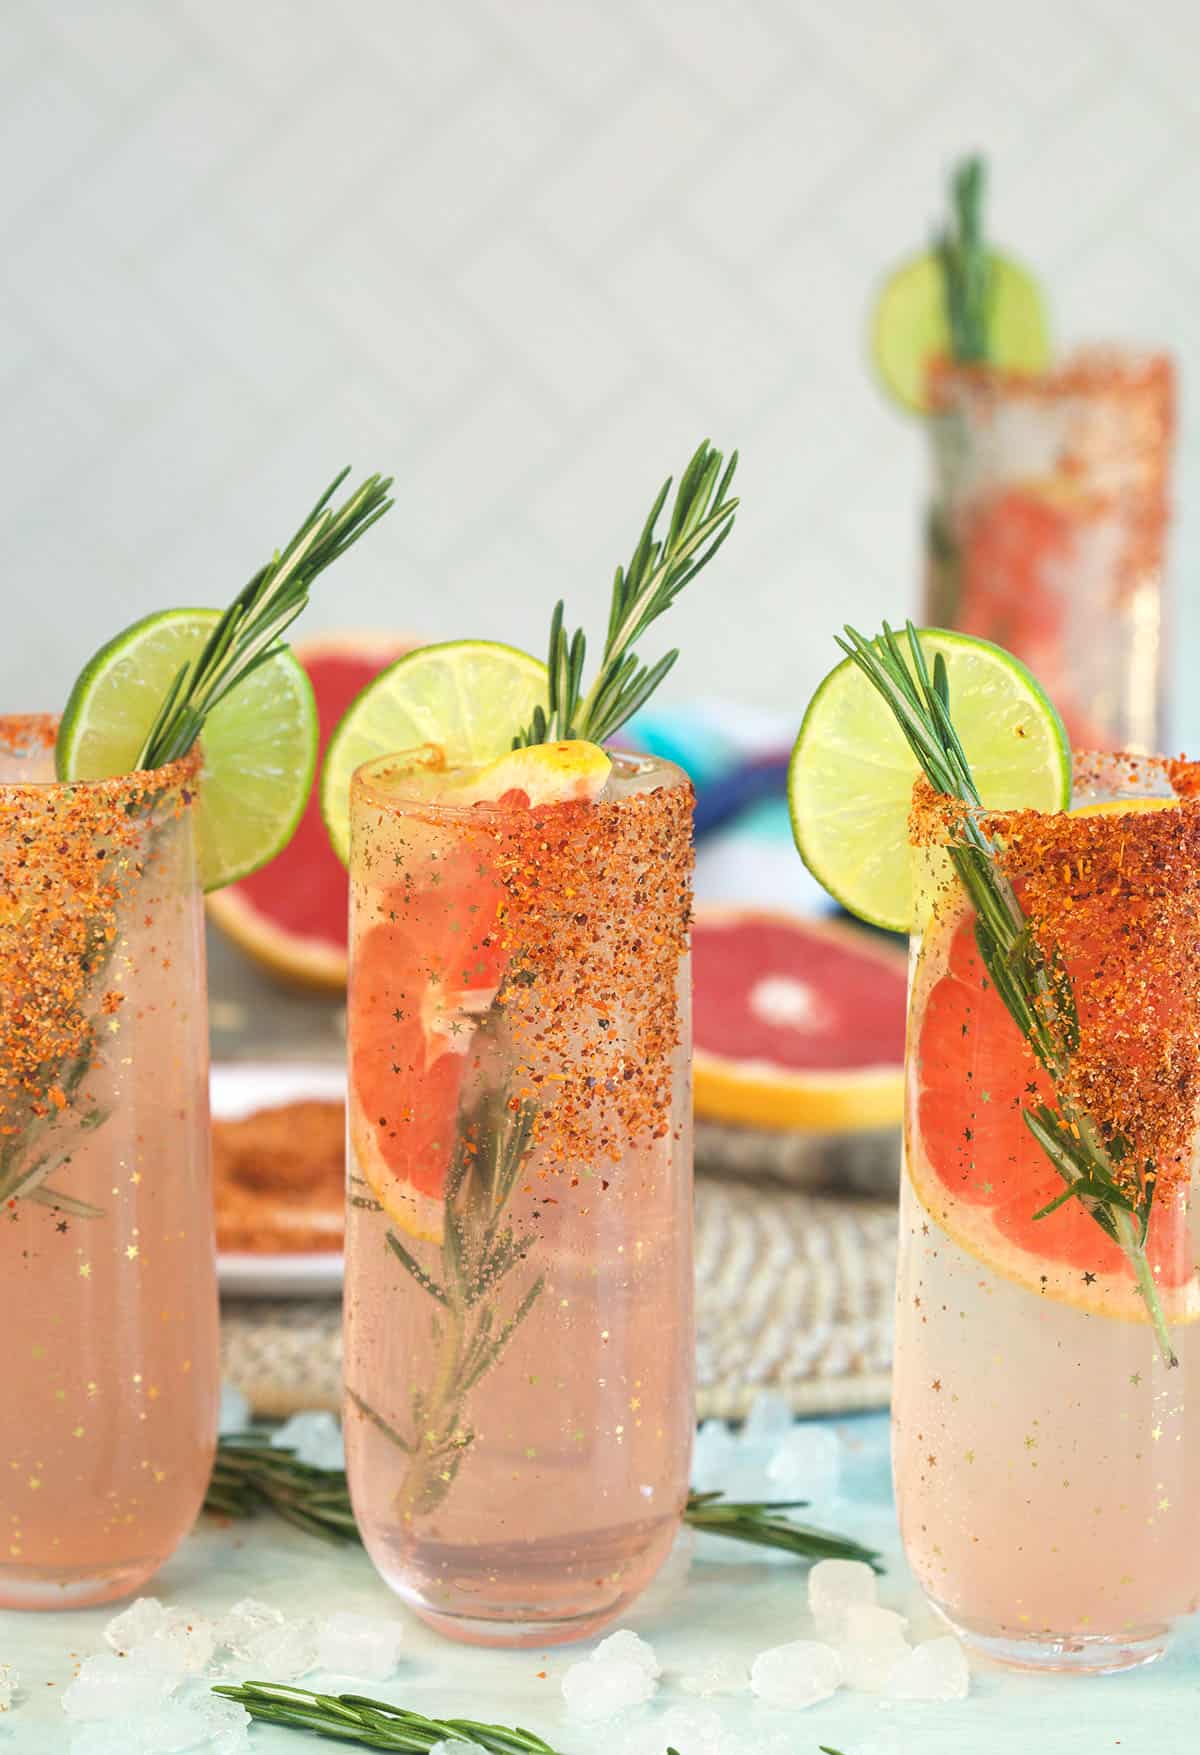 Several glasses filled with paloma cocktail are garnished with rosemary and limes.